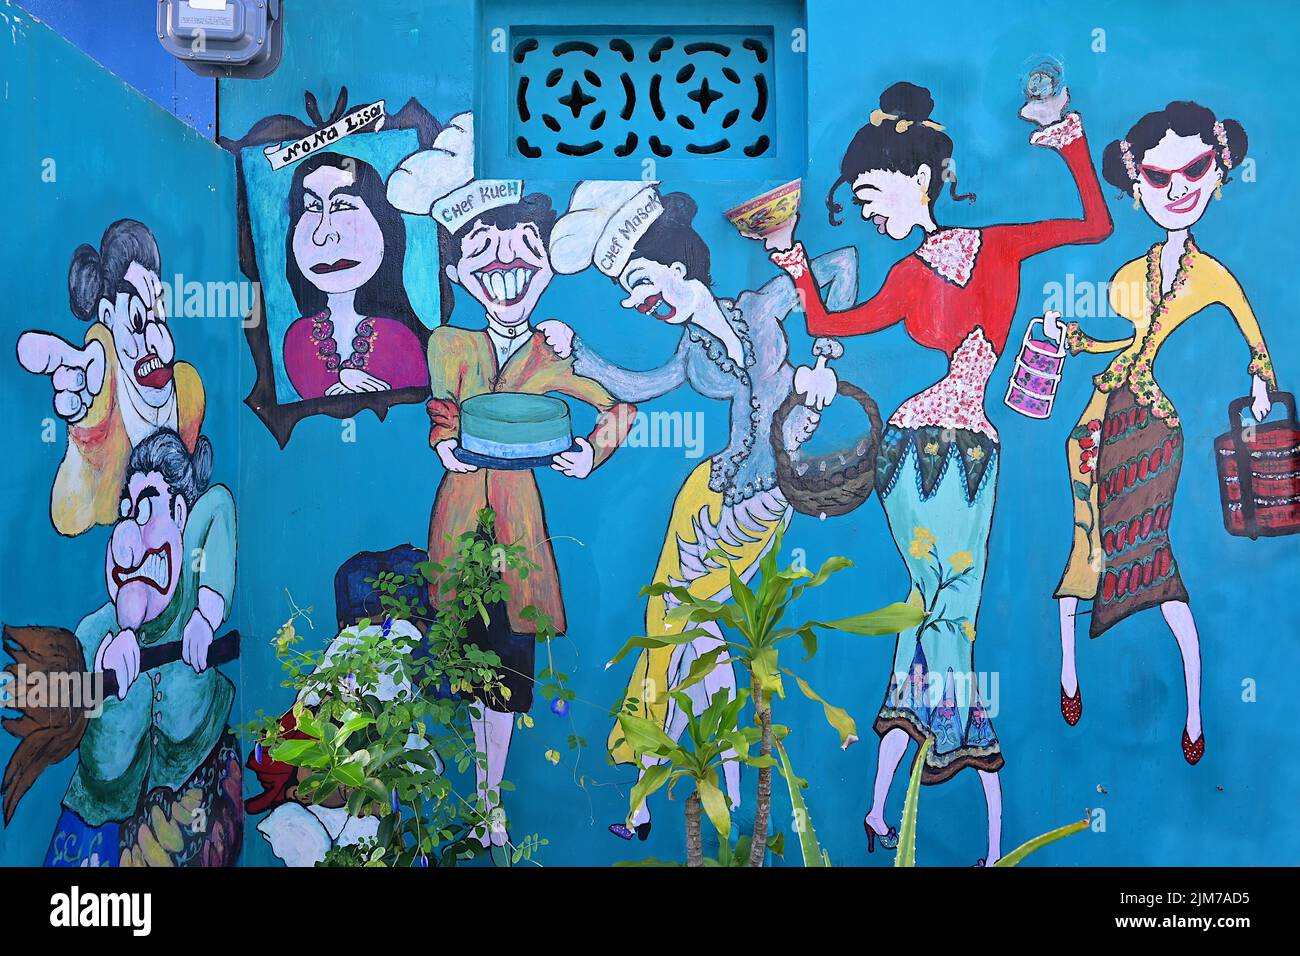 Street art and wall mural with caricatures of South East Asian Nonya ladies and Mona Lisa in traditional Peranakan costumes, Joo Chiat, Singapore Stock Photo